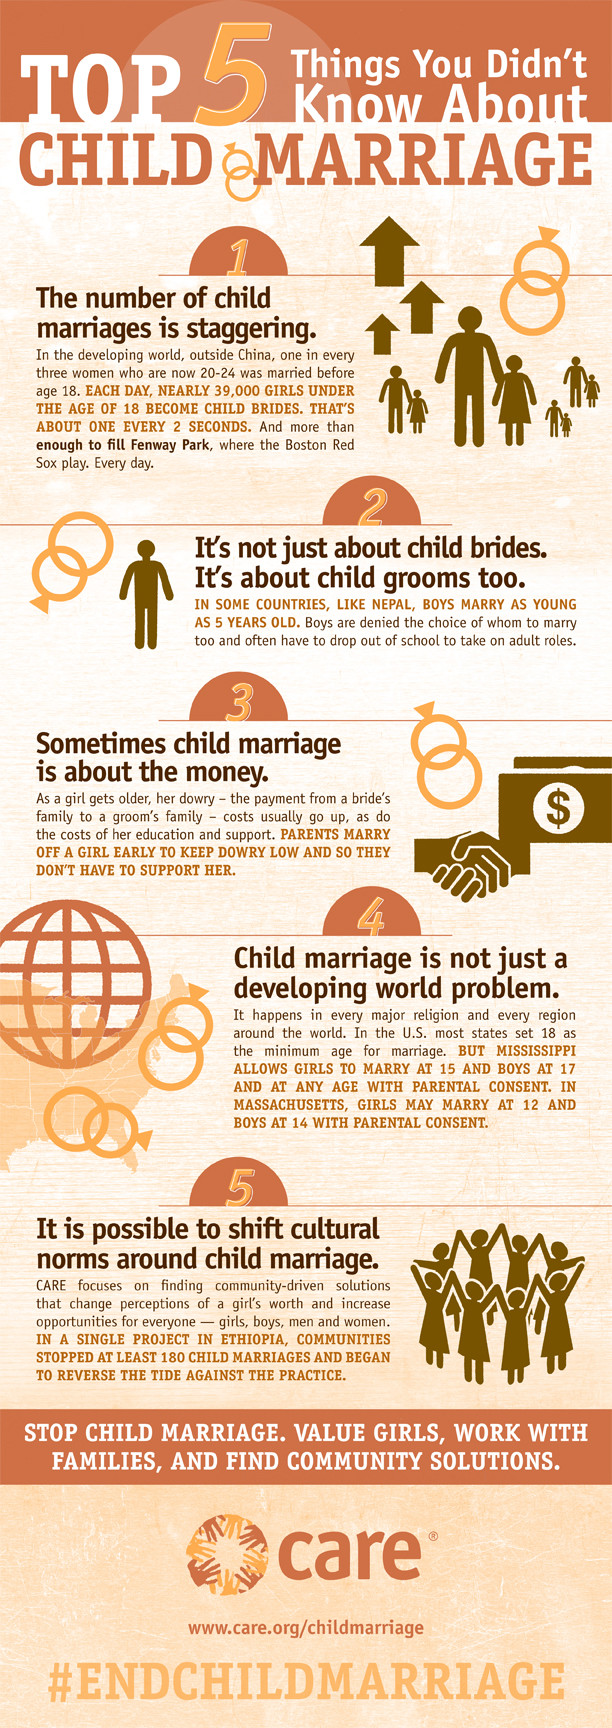 Child-Marriage-Infographic Final